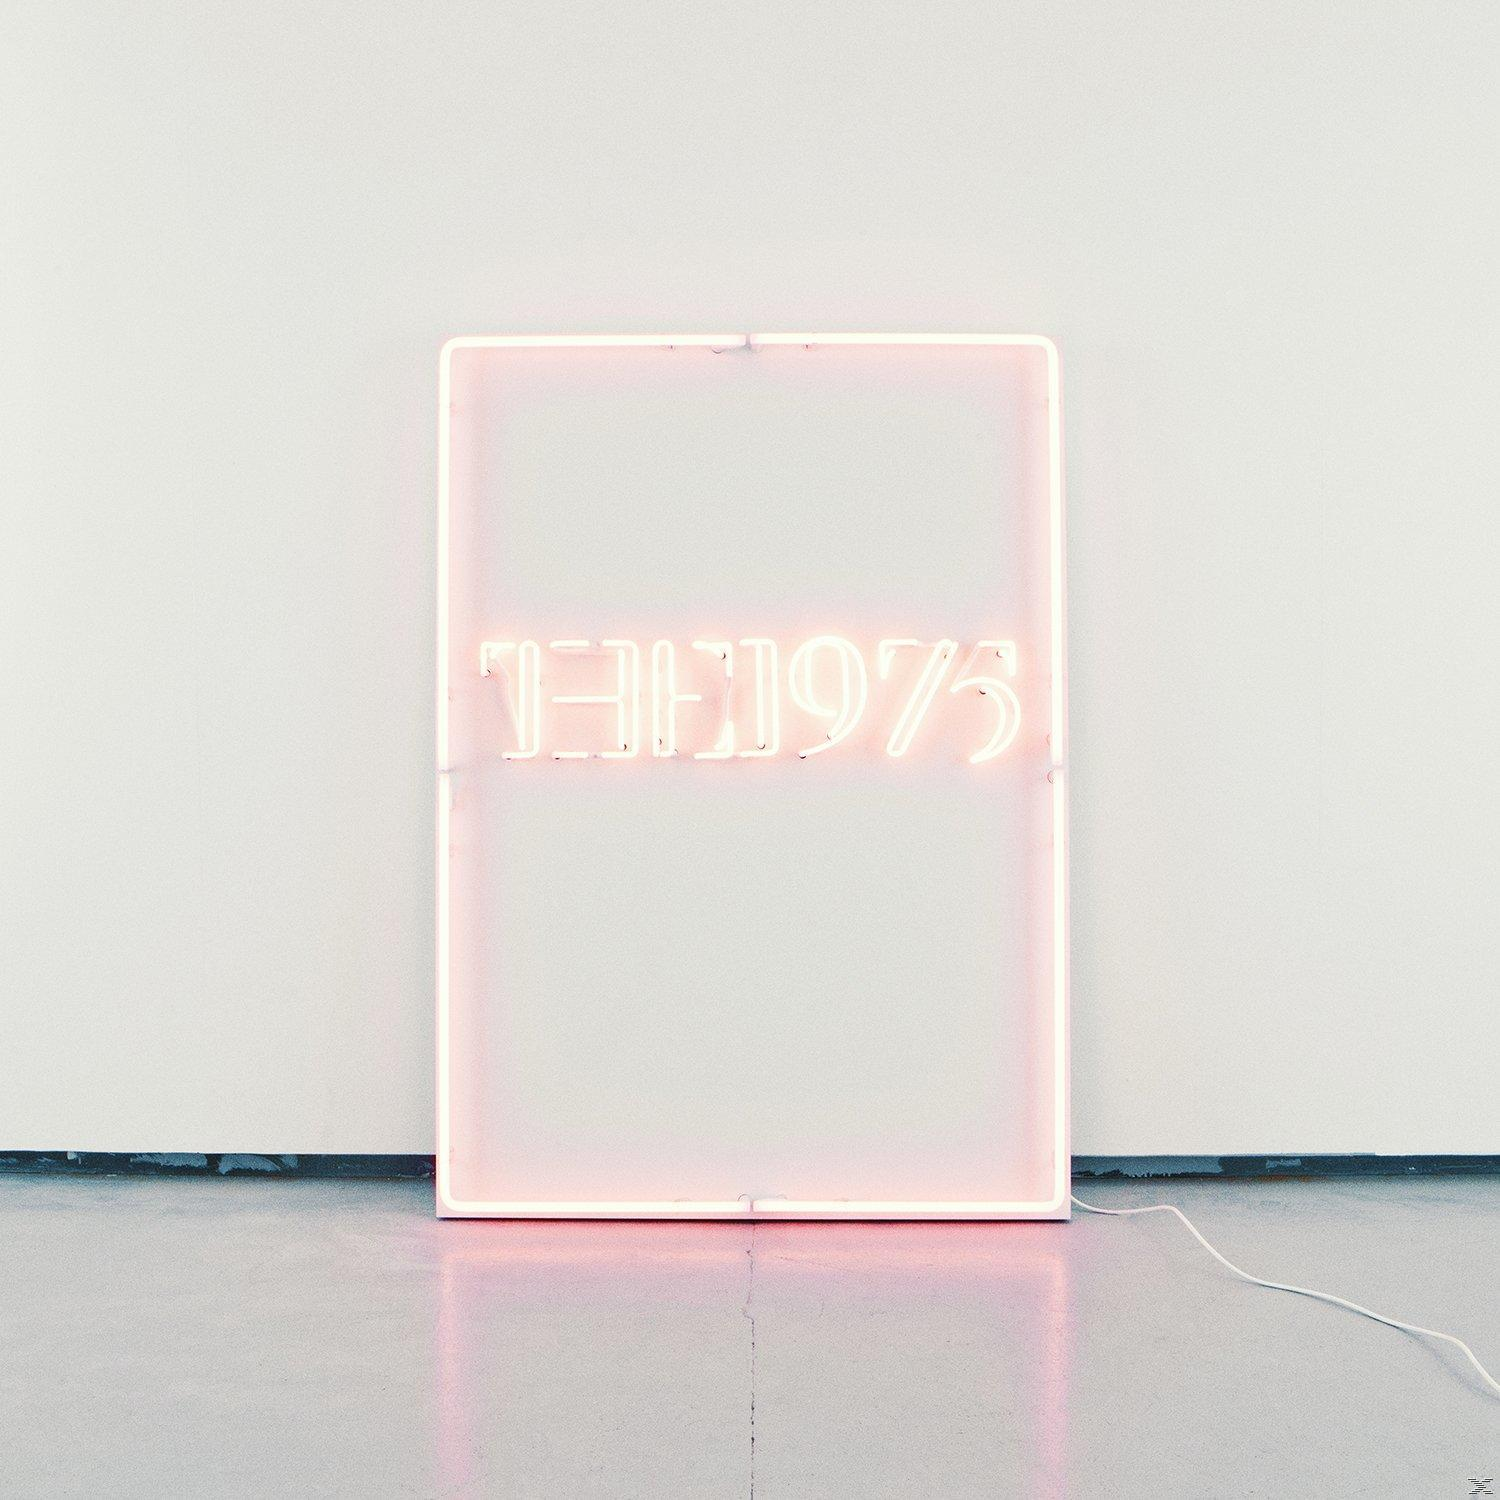 The 1975 - I Like It (Vinyl) Beautiful You Yet - So You When Of For So It Are Unaware Sleep